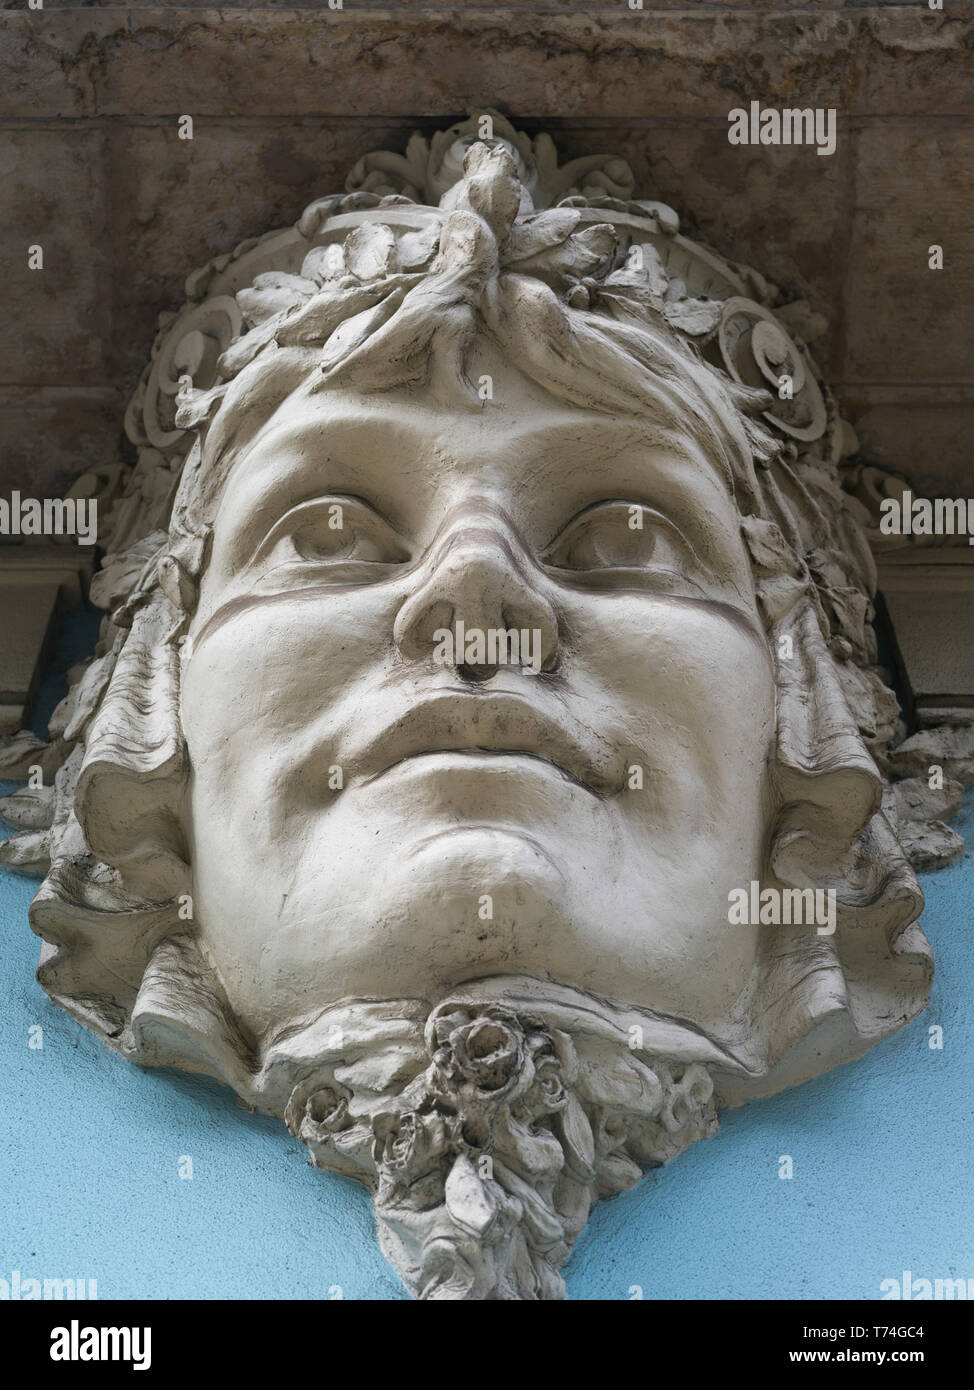 Sculpture of a man's face; Portugal Stock Photo